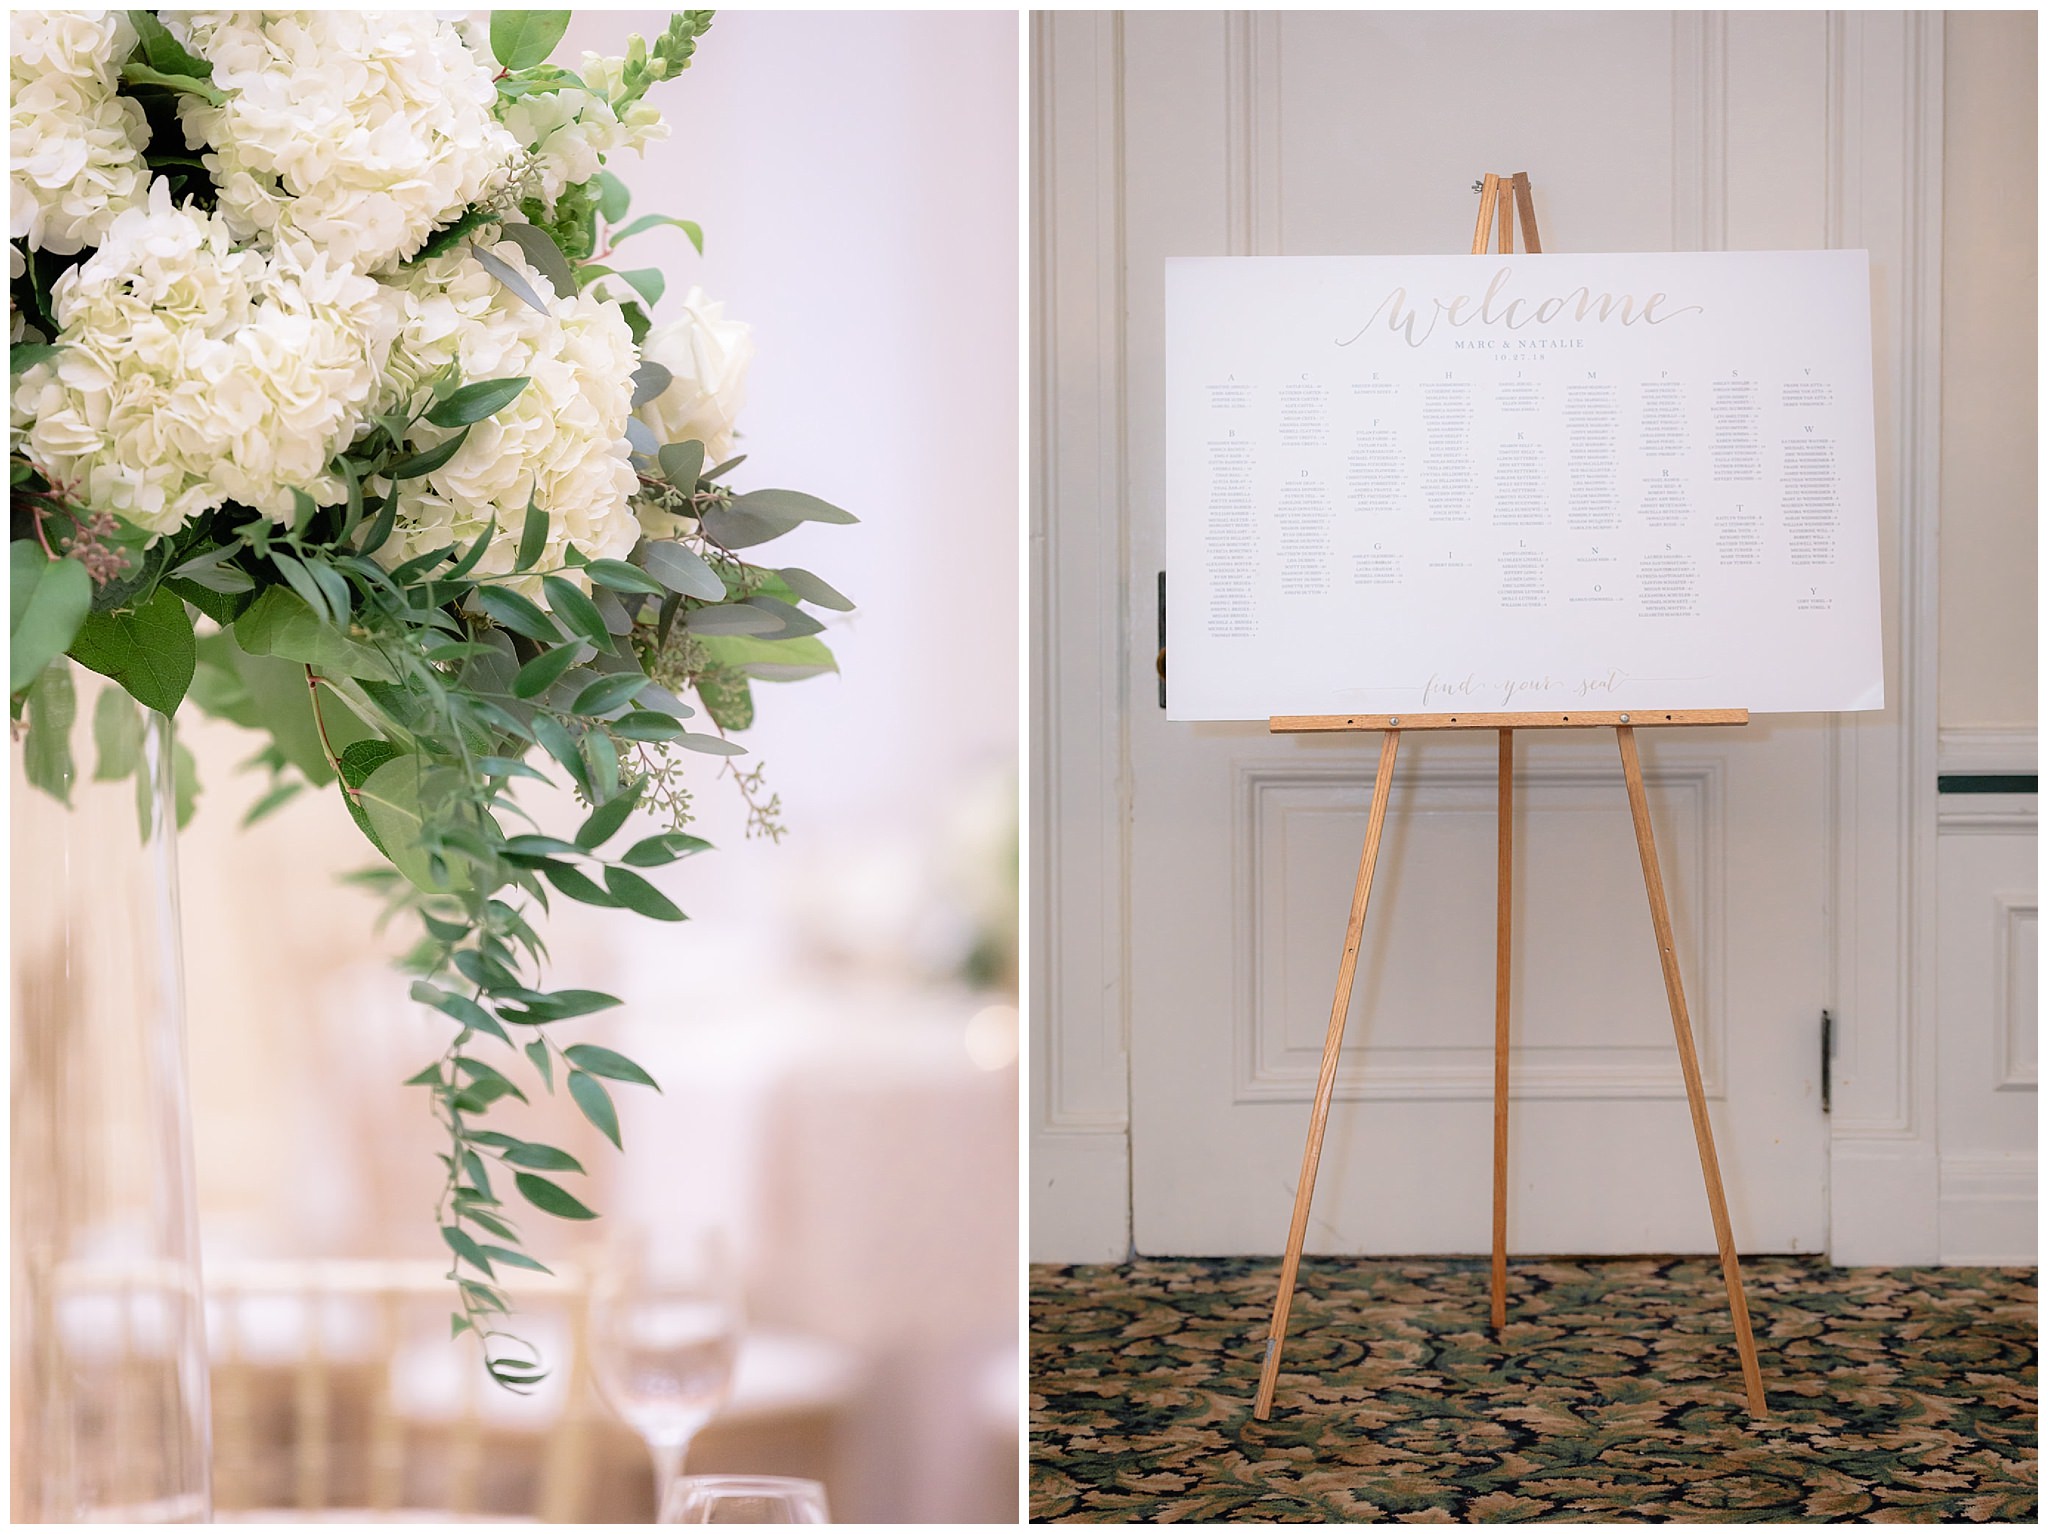 Floral centerpiece details and seating chart at a Soldiers & Sailors wedding